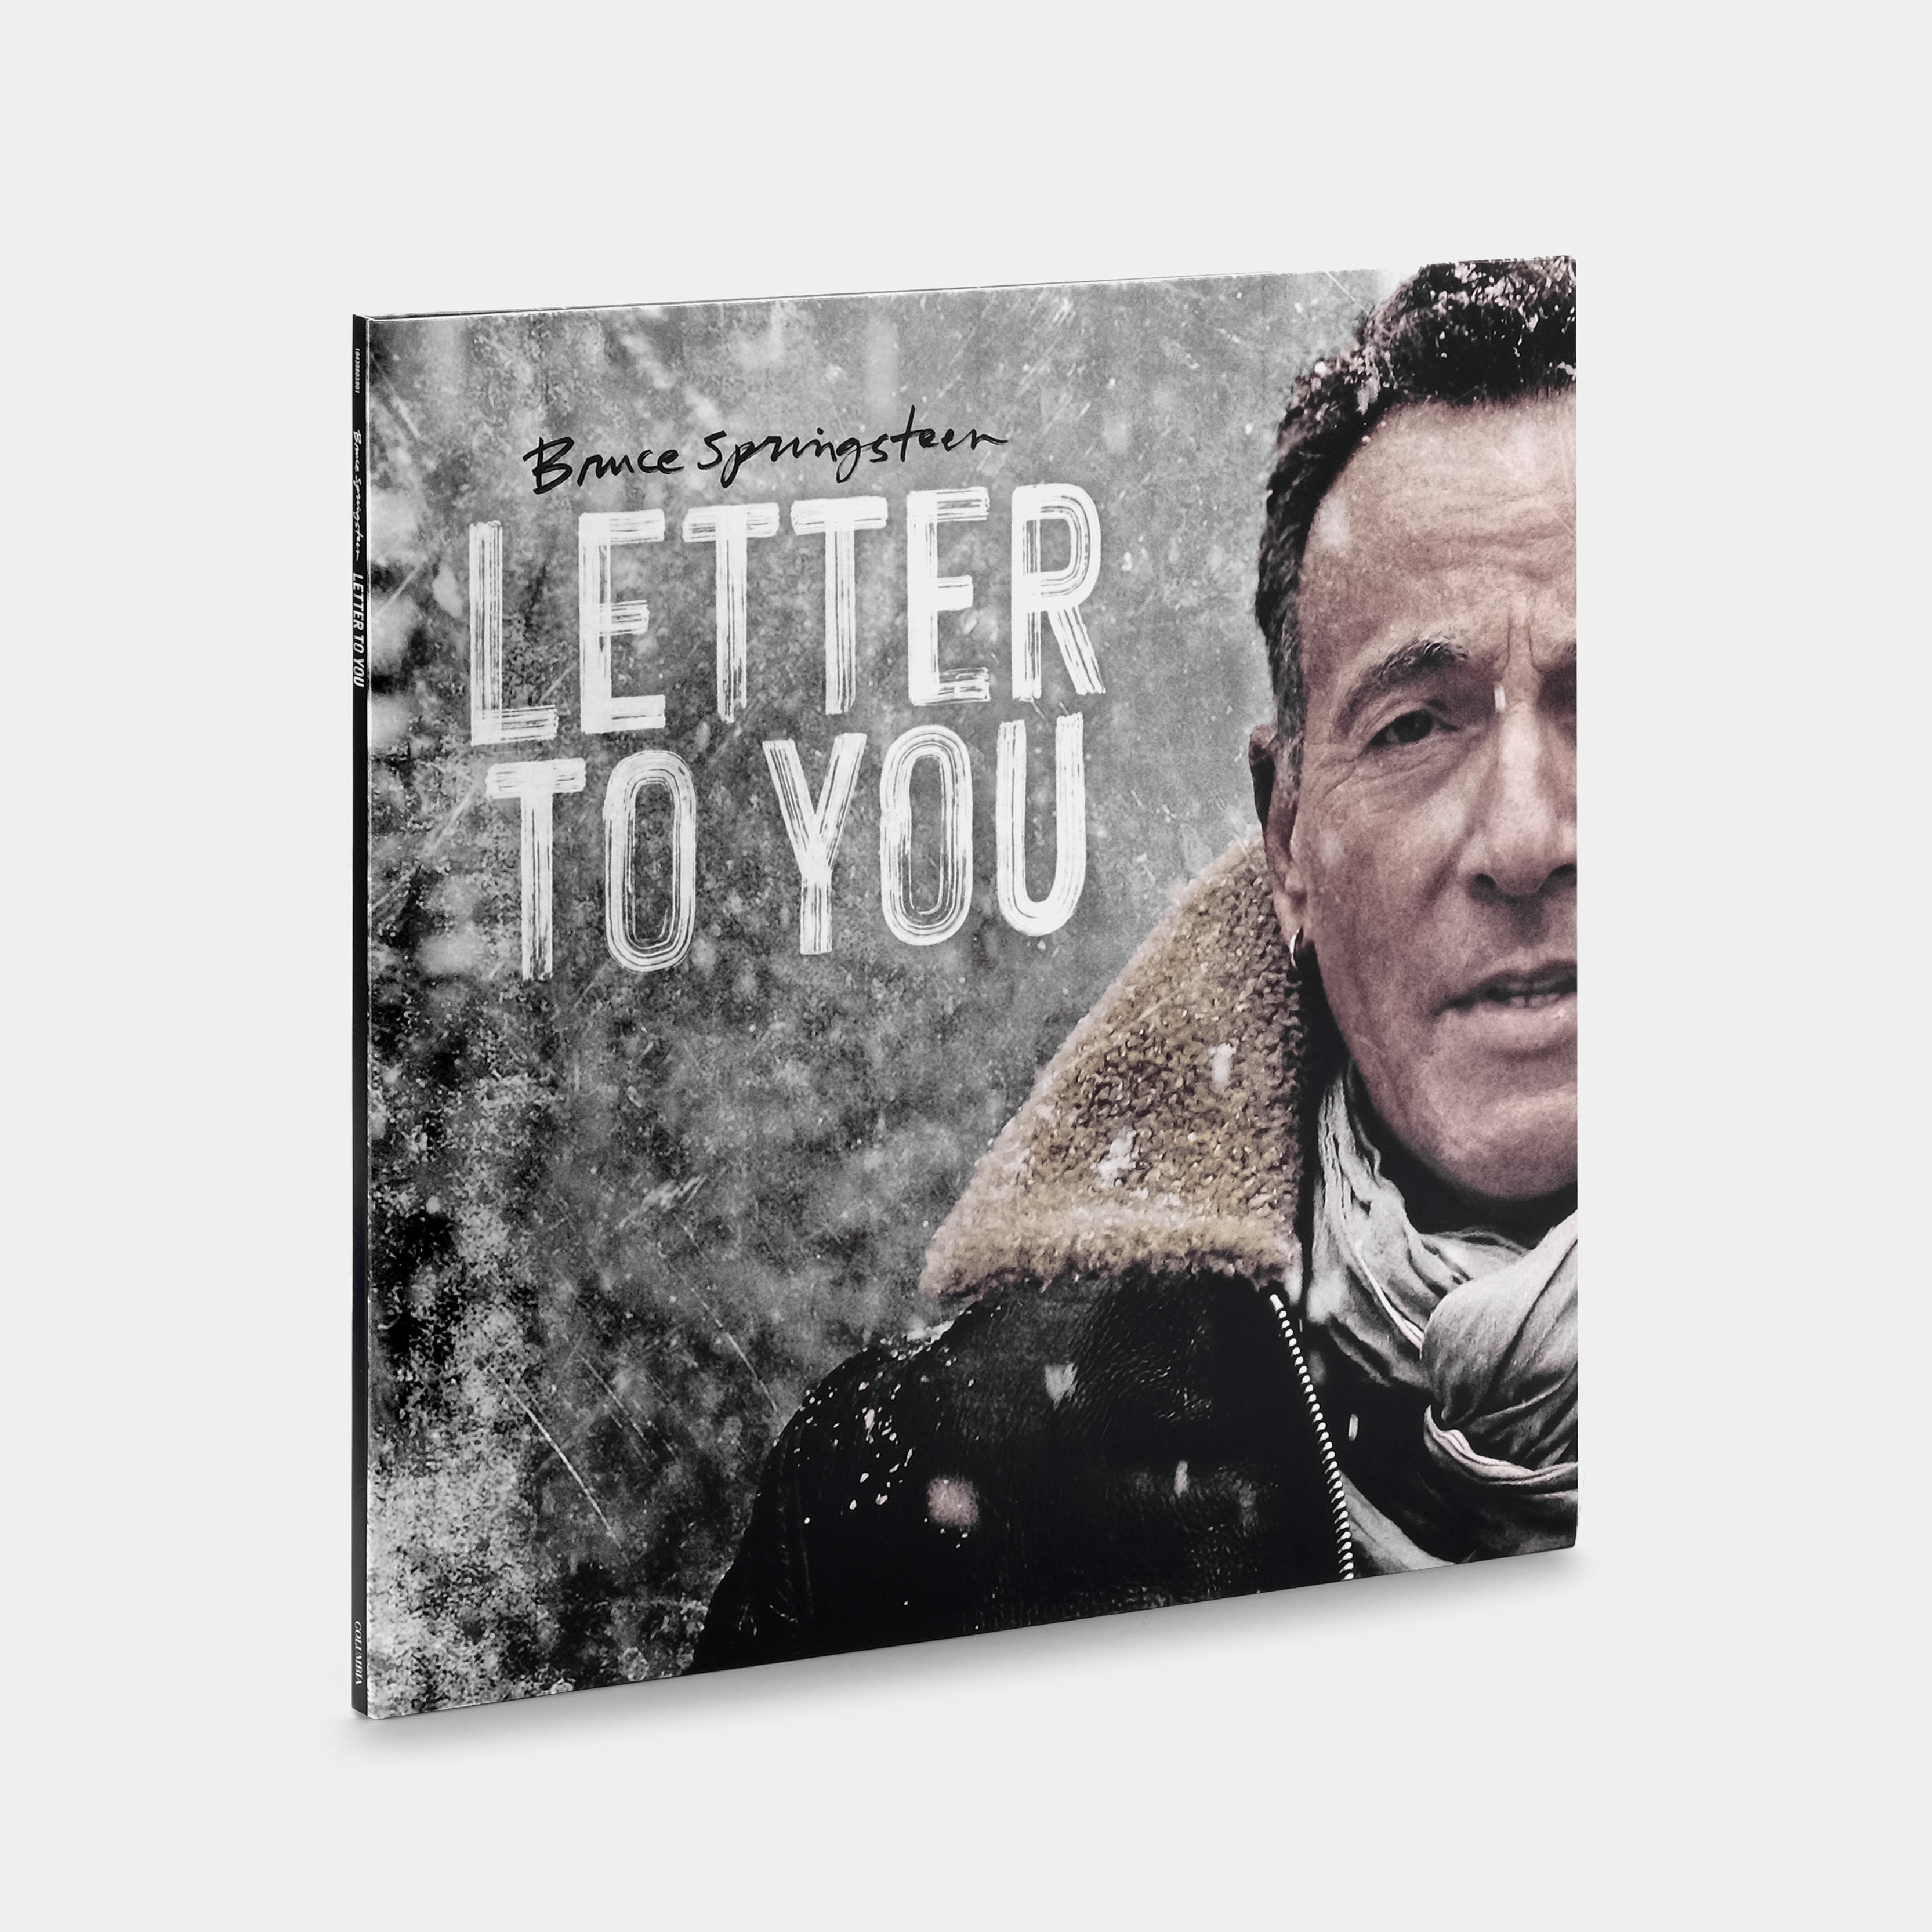 Bruce Springsteen - Letter To You 2xLP Grey Vinyl Record